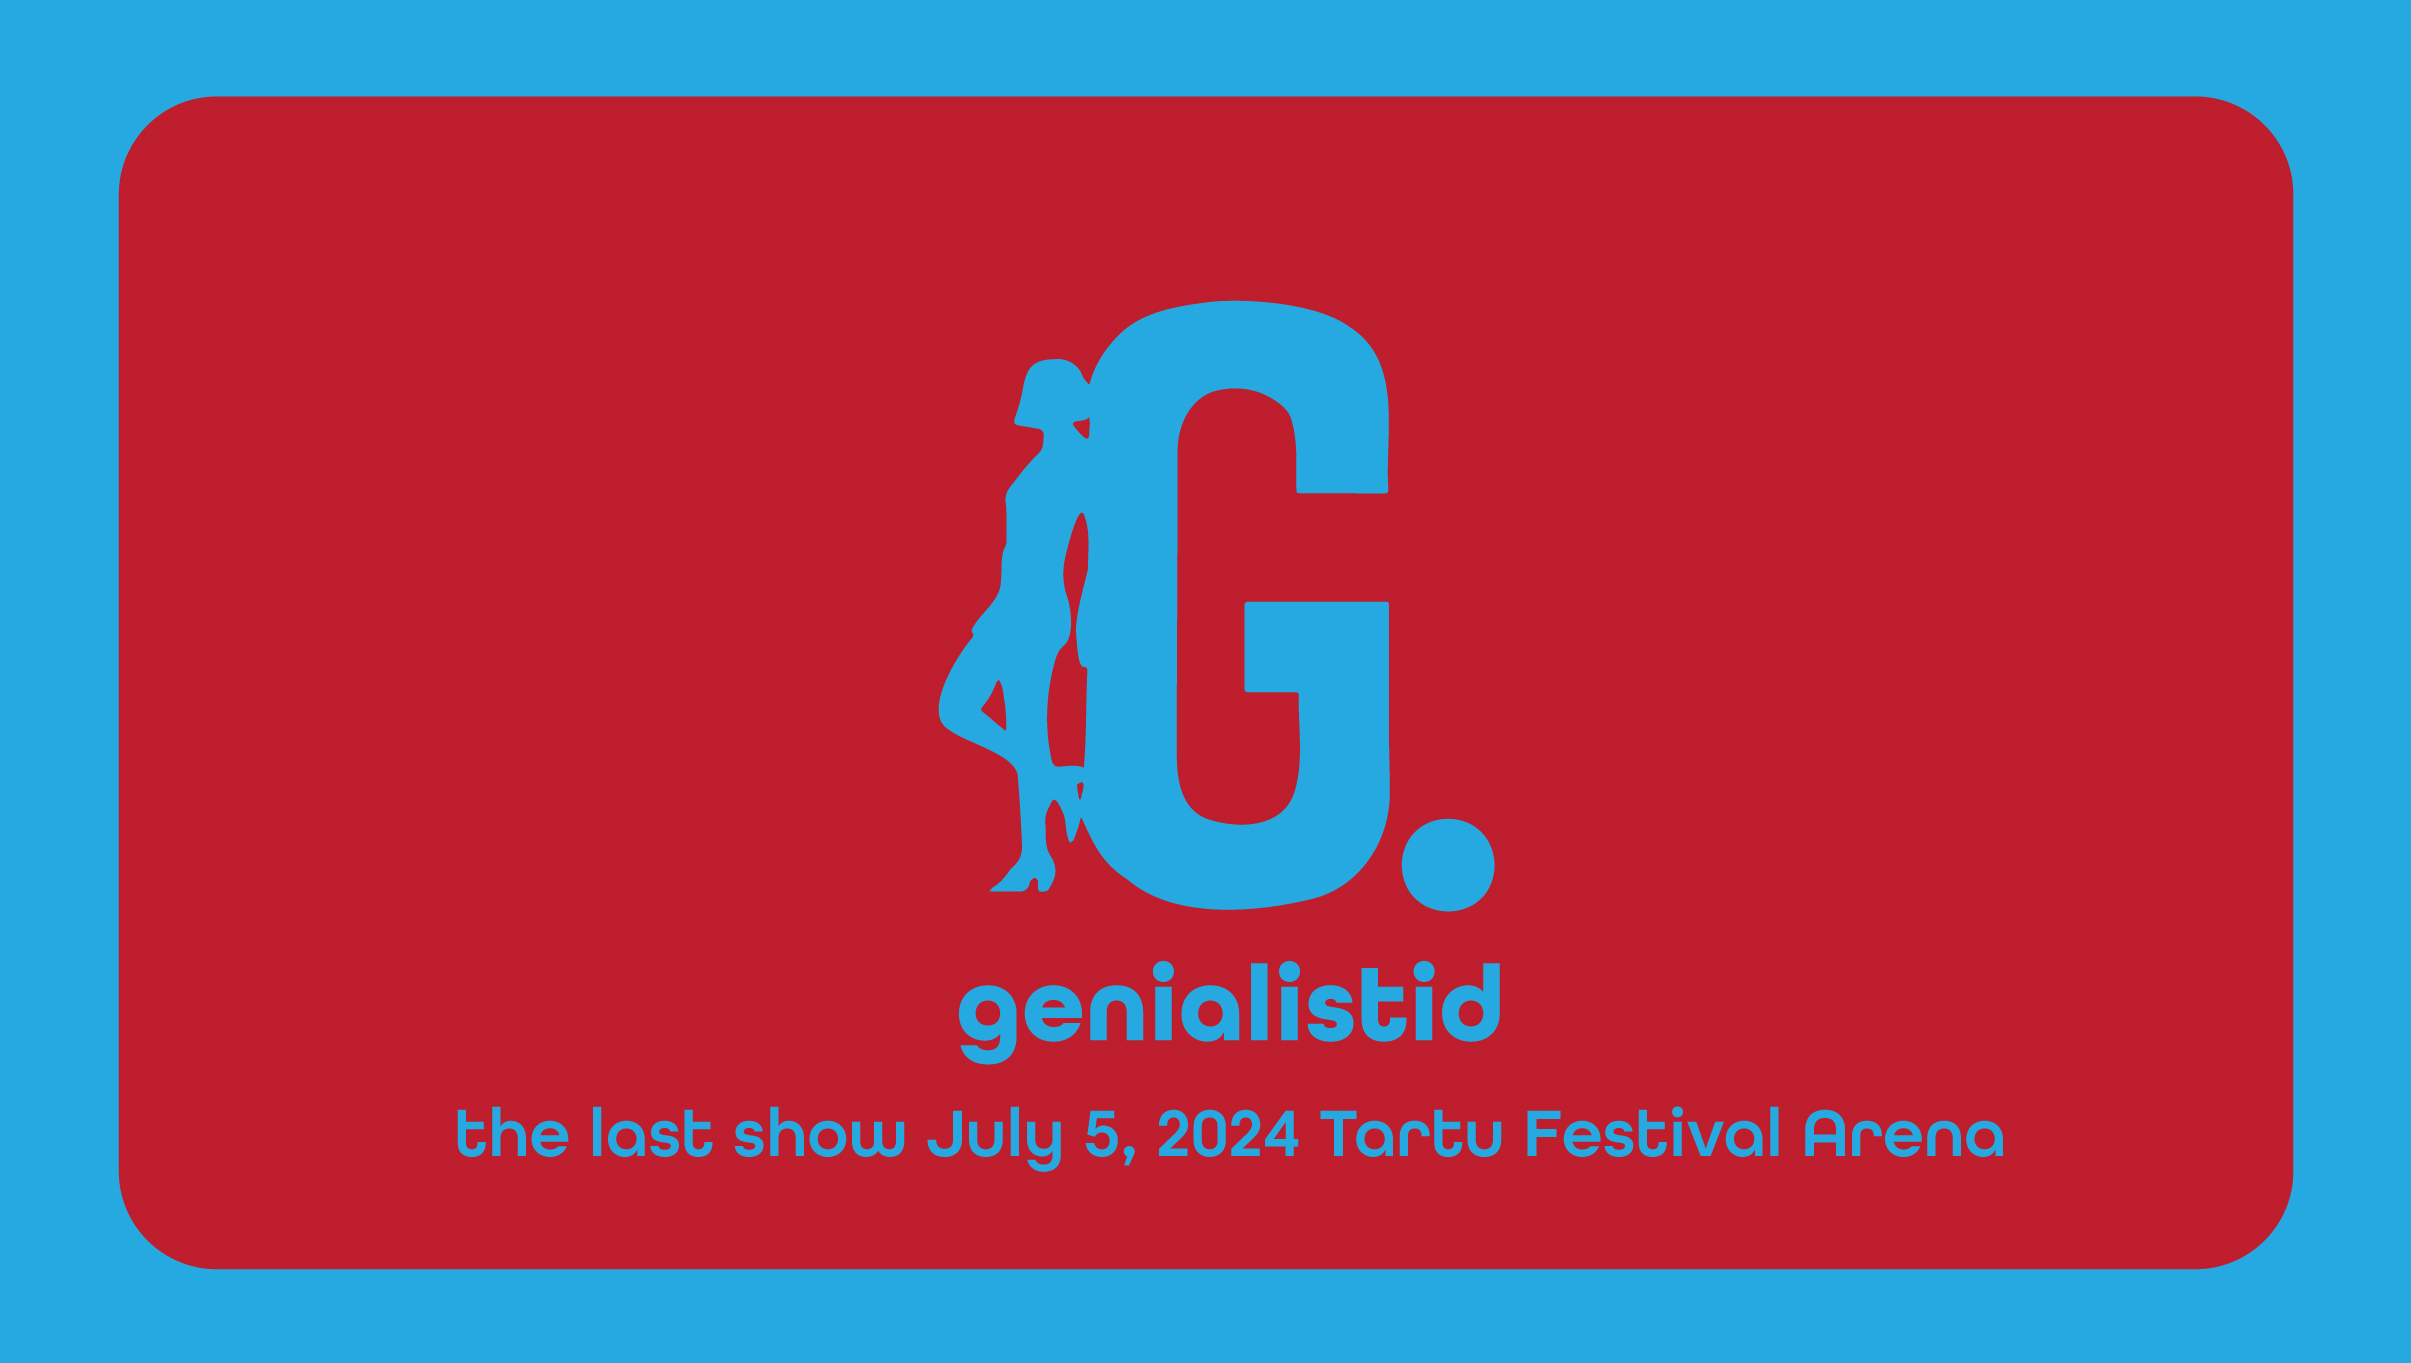 Poster for Genialistid last show. Received in e-mail from and used by permission of the band.